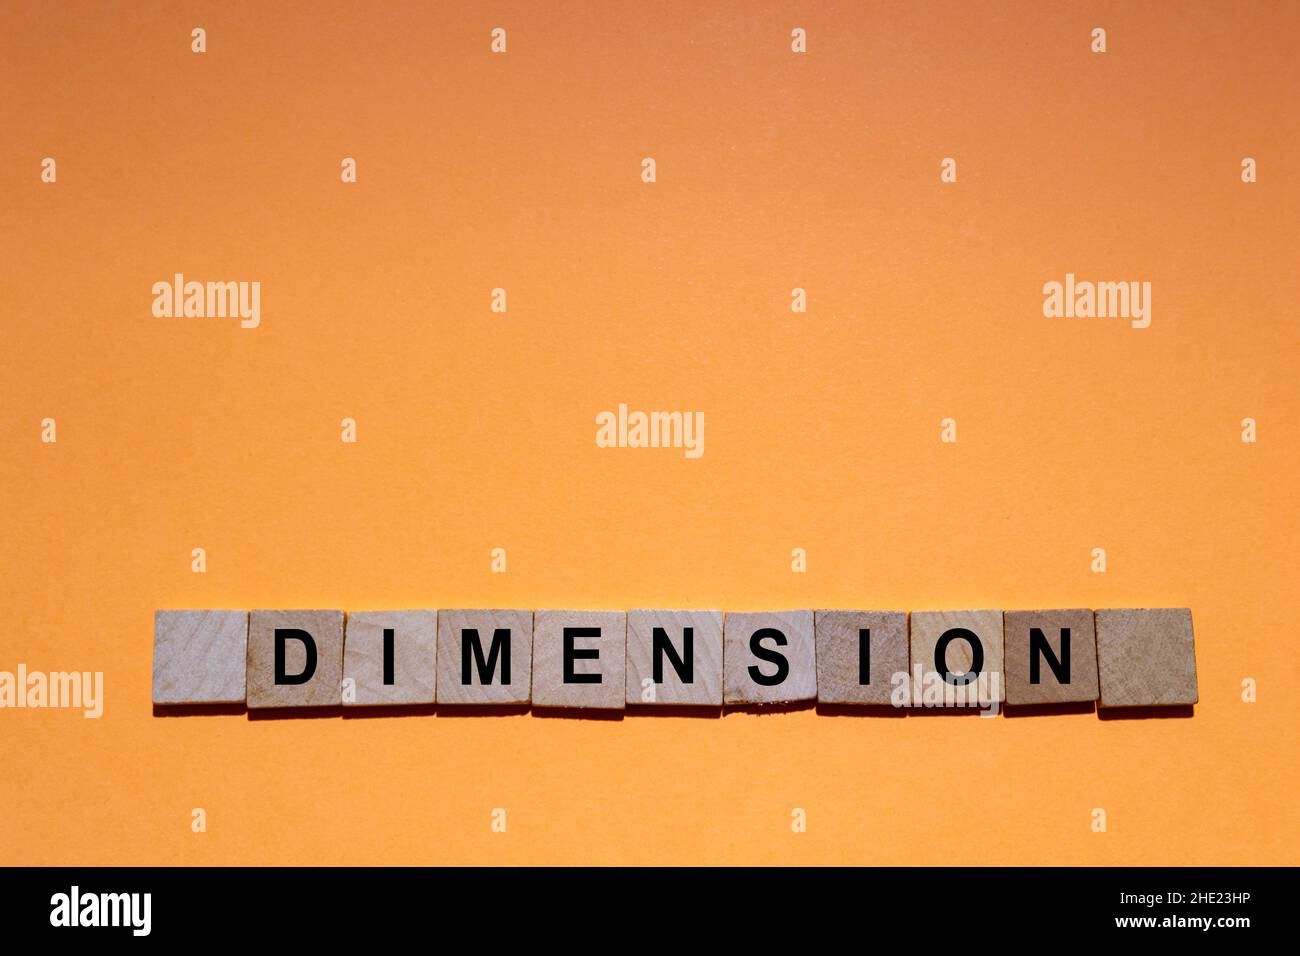 DIMENSION. Word written on square wooden tiles with an orange background. Horizontal photography. Stock Photo